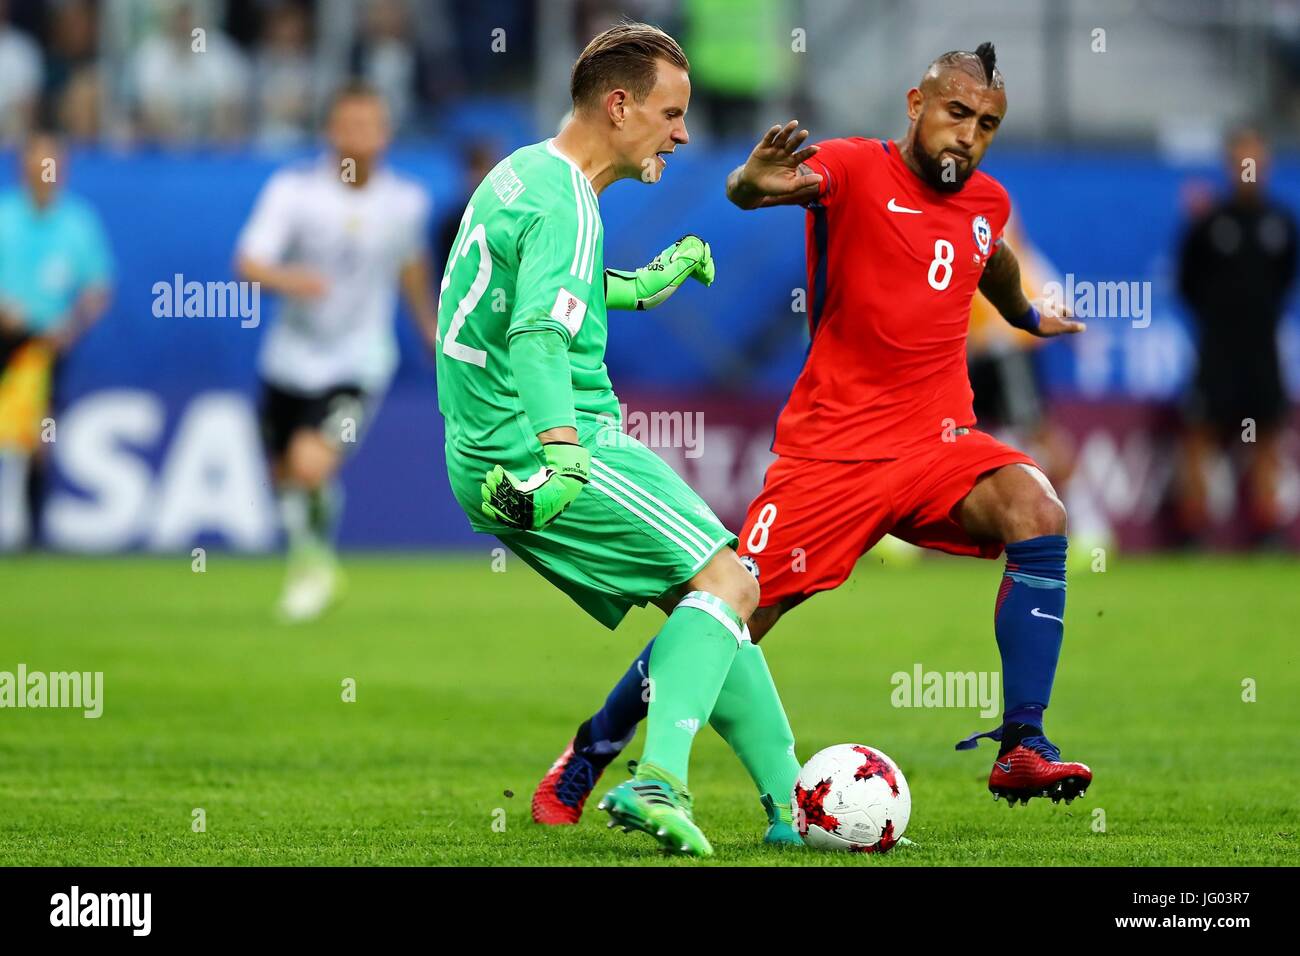 St Petersburg, Russia. 2nd July, 2017. CHILE VS GERMANY - Arturo Vidal of Chile contests bid with Marc-Andre Ter Stegen of Germany during a match between Chile and Germany at the 2017 Confederations Cup Final this Sunday (02), held at the Krestovsky Stadium (Zenit Arena) in St. Petersburg, Russia . (Photo: Heuler Andrey/DiaEsportivo/Fotoarena/Alamy Live News) Stock Photo